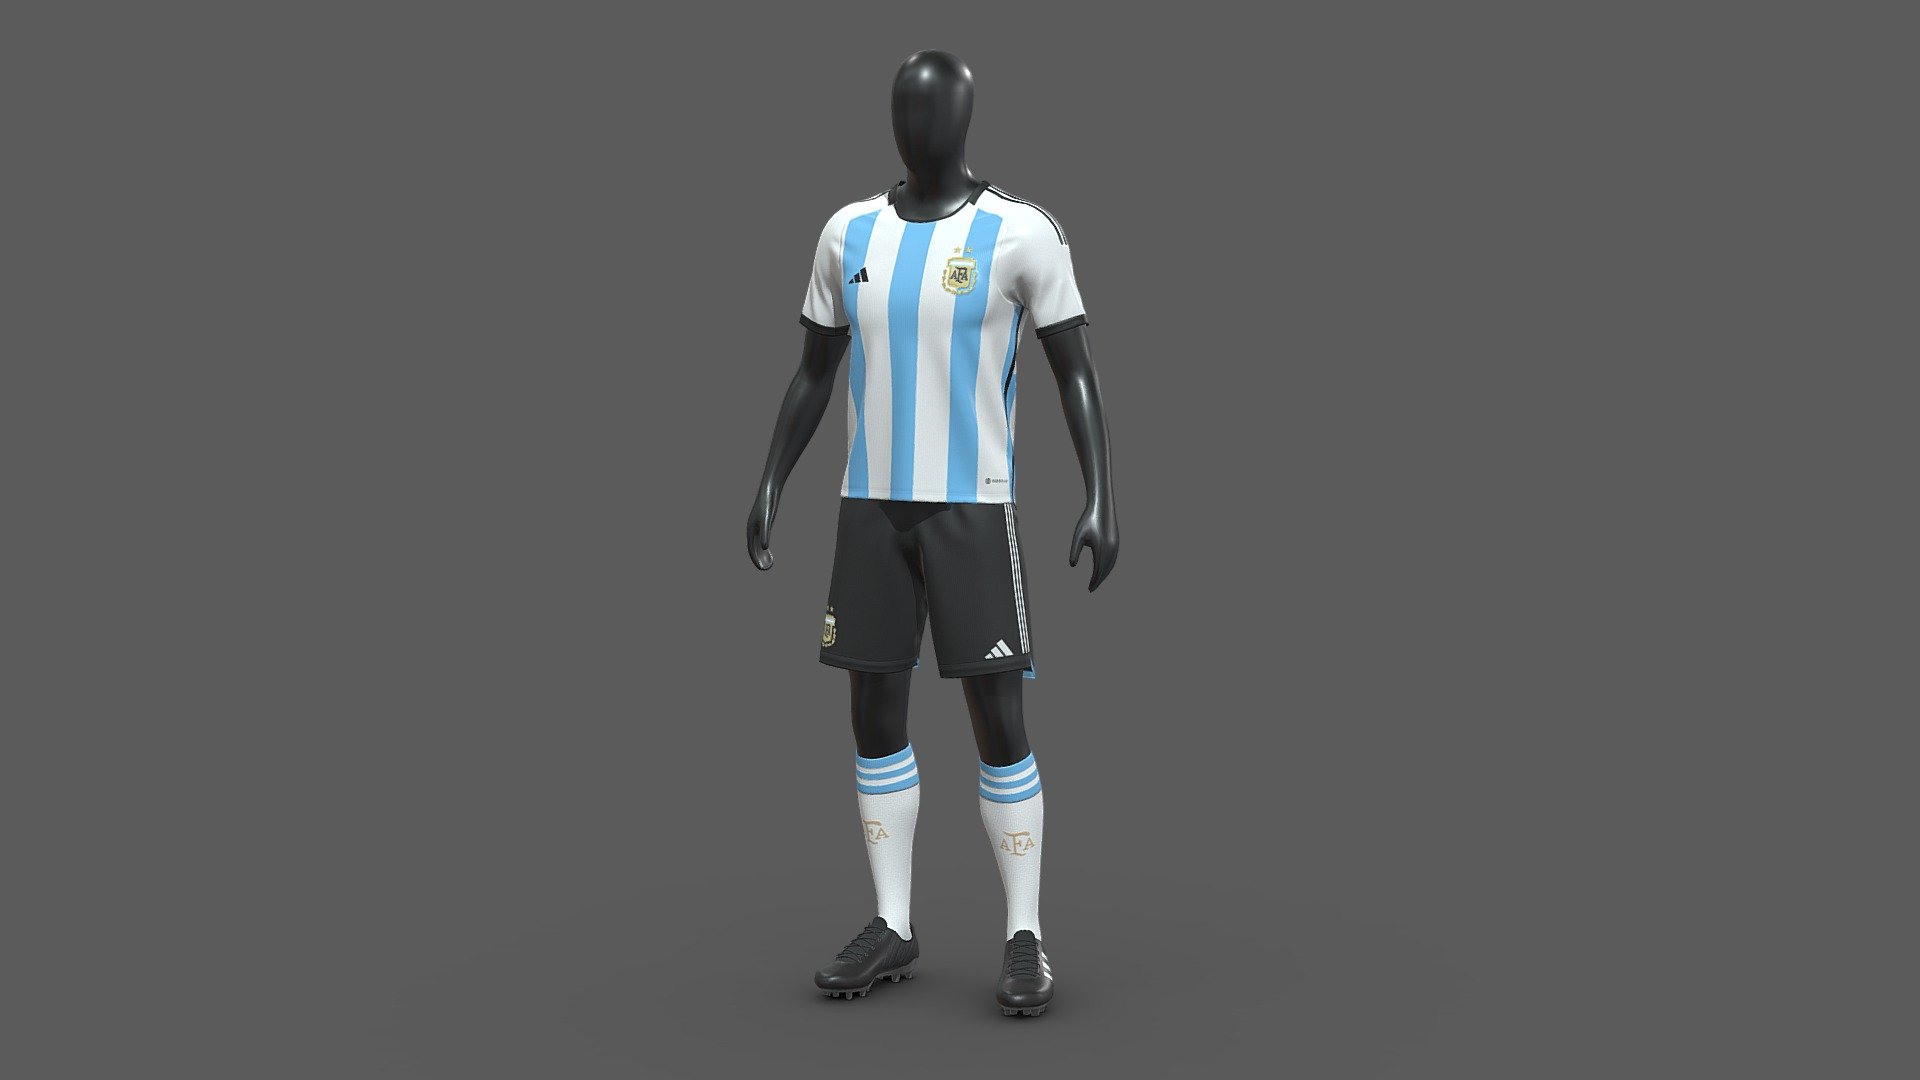 Argentina Team Football Jersey for Games

This is a Lowpoly PBR model ready for use in AR, VR, Realtime Visualizations, Games with 4K Textures.

Features:

The Jersey includes Full outfit with a T-Shirt, Shorts, Socks &amp; Shoes. Mannequin is also Included.

Jersey Full Outfit - Polygons - 13,471 | Vertices - 10,653

Mannequin - Polygons - 6,503 | Vertices - 6,505

Low-poly game ready PBR Model, Real-World Scale, High-quality Textures.

Models are ready with Textures &amp; Materials for Unity. Just Drag &amp; Drop the models into your scene.
Unity3d

Albedo, AO, Metallic Smoothness, Roughness &amp; Normal Maps

All the textures are set at 2K resolution in Unity for optimized performance which can be later changed to 4k or 1k in unity itself 3d model